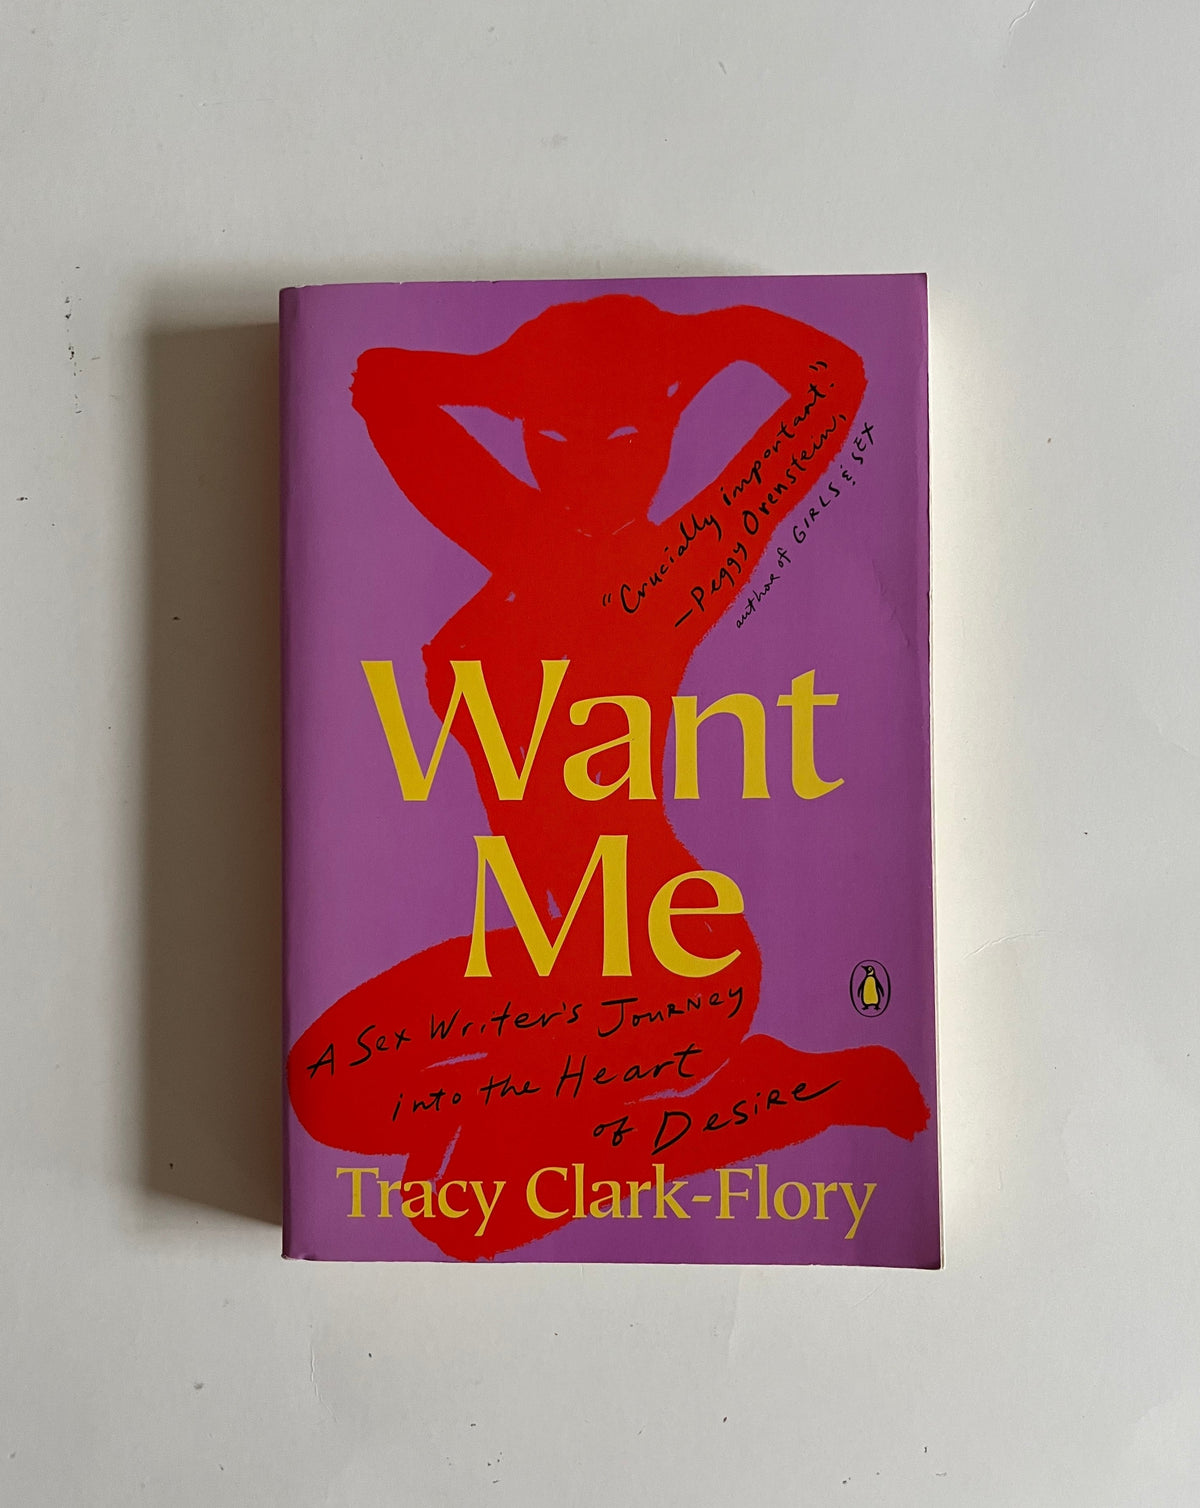 Want Me: A Sex Writer&#39;s Journey into the Heart of Desire by Tracy Clark-Flory